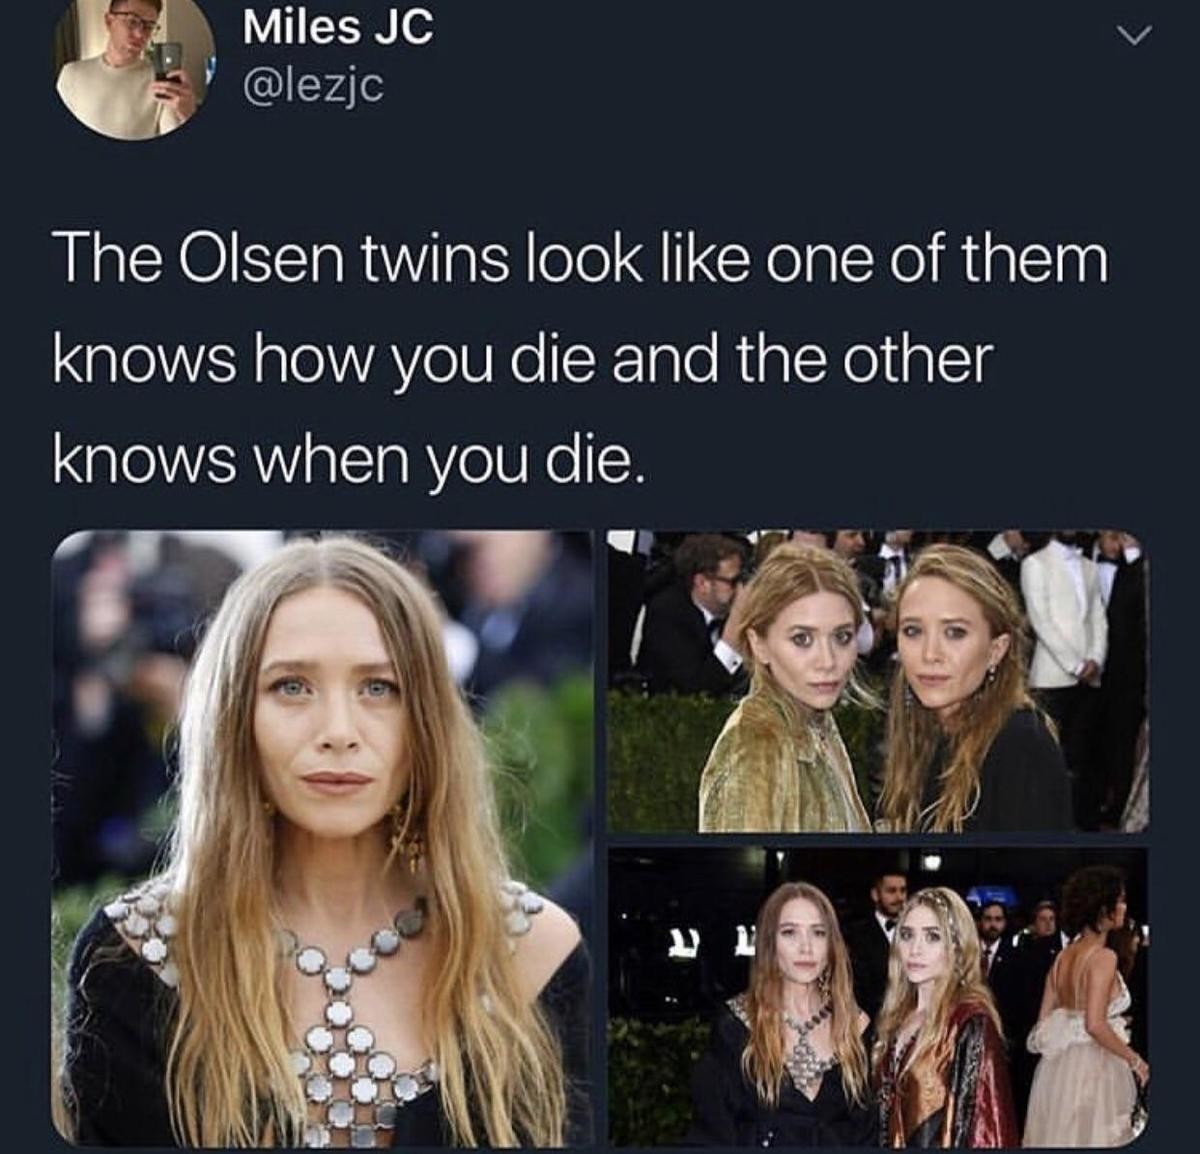 olsen twins one knows how you die - Miles Jc The Olsen twins look one of them knows how you die and the other knows when you die.